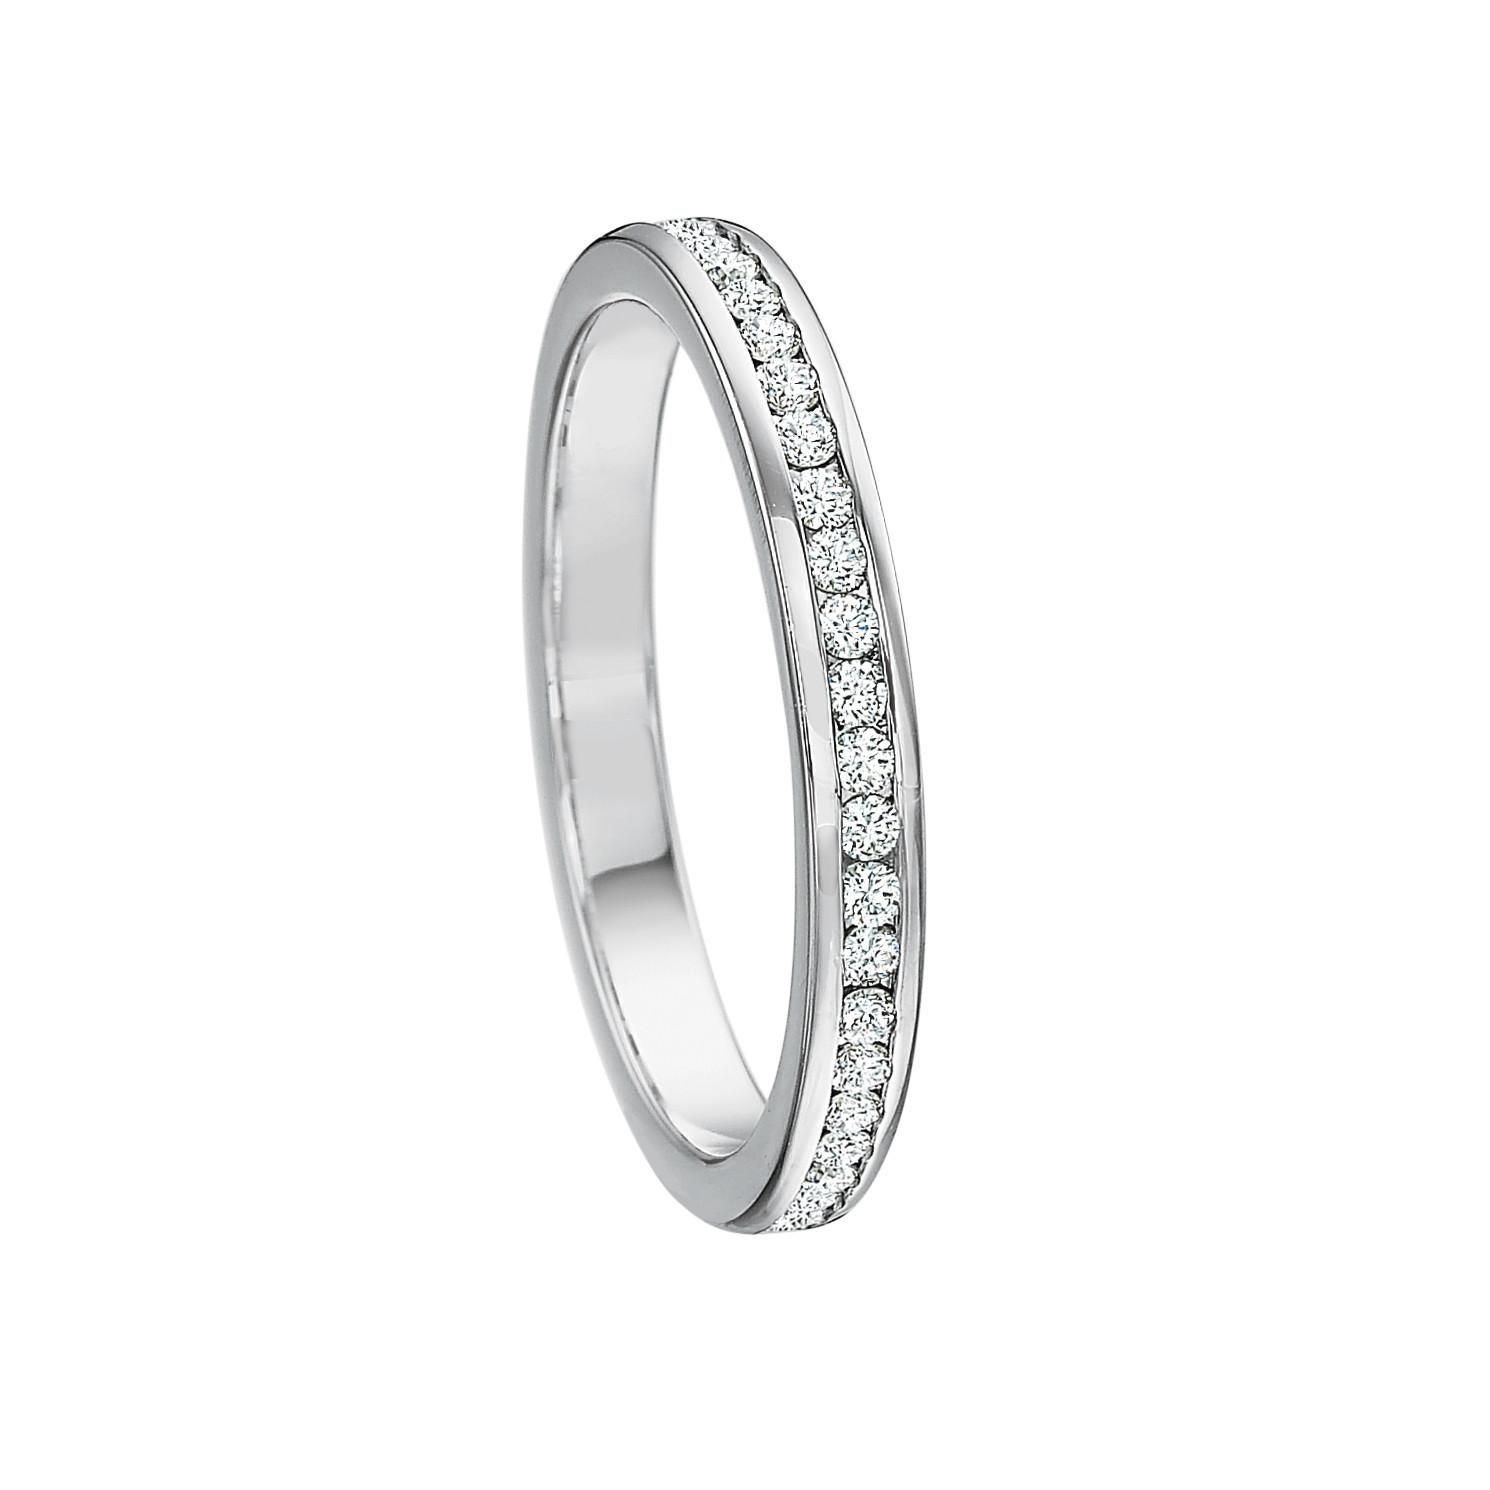 Diamond eternity band ring, showcasing near-colorless round brilliant-cut diamonds channel-set in high-polished platinum.

46 diamonds weighing 0.35 total carats
2.1mm wide
Size 6
